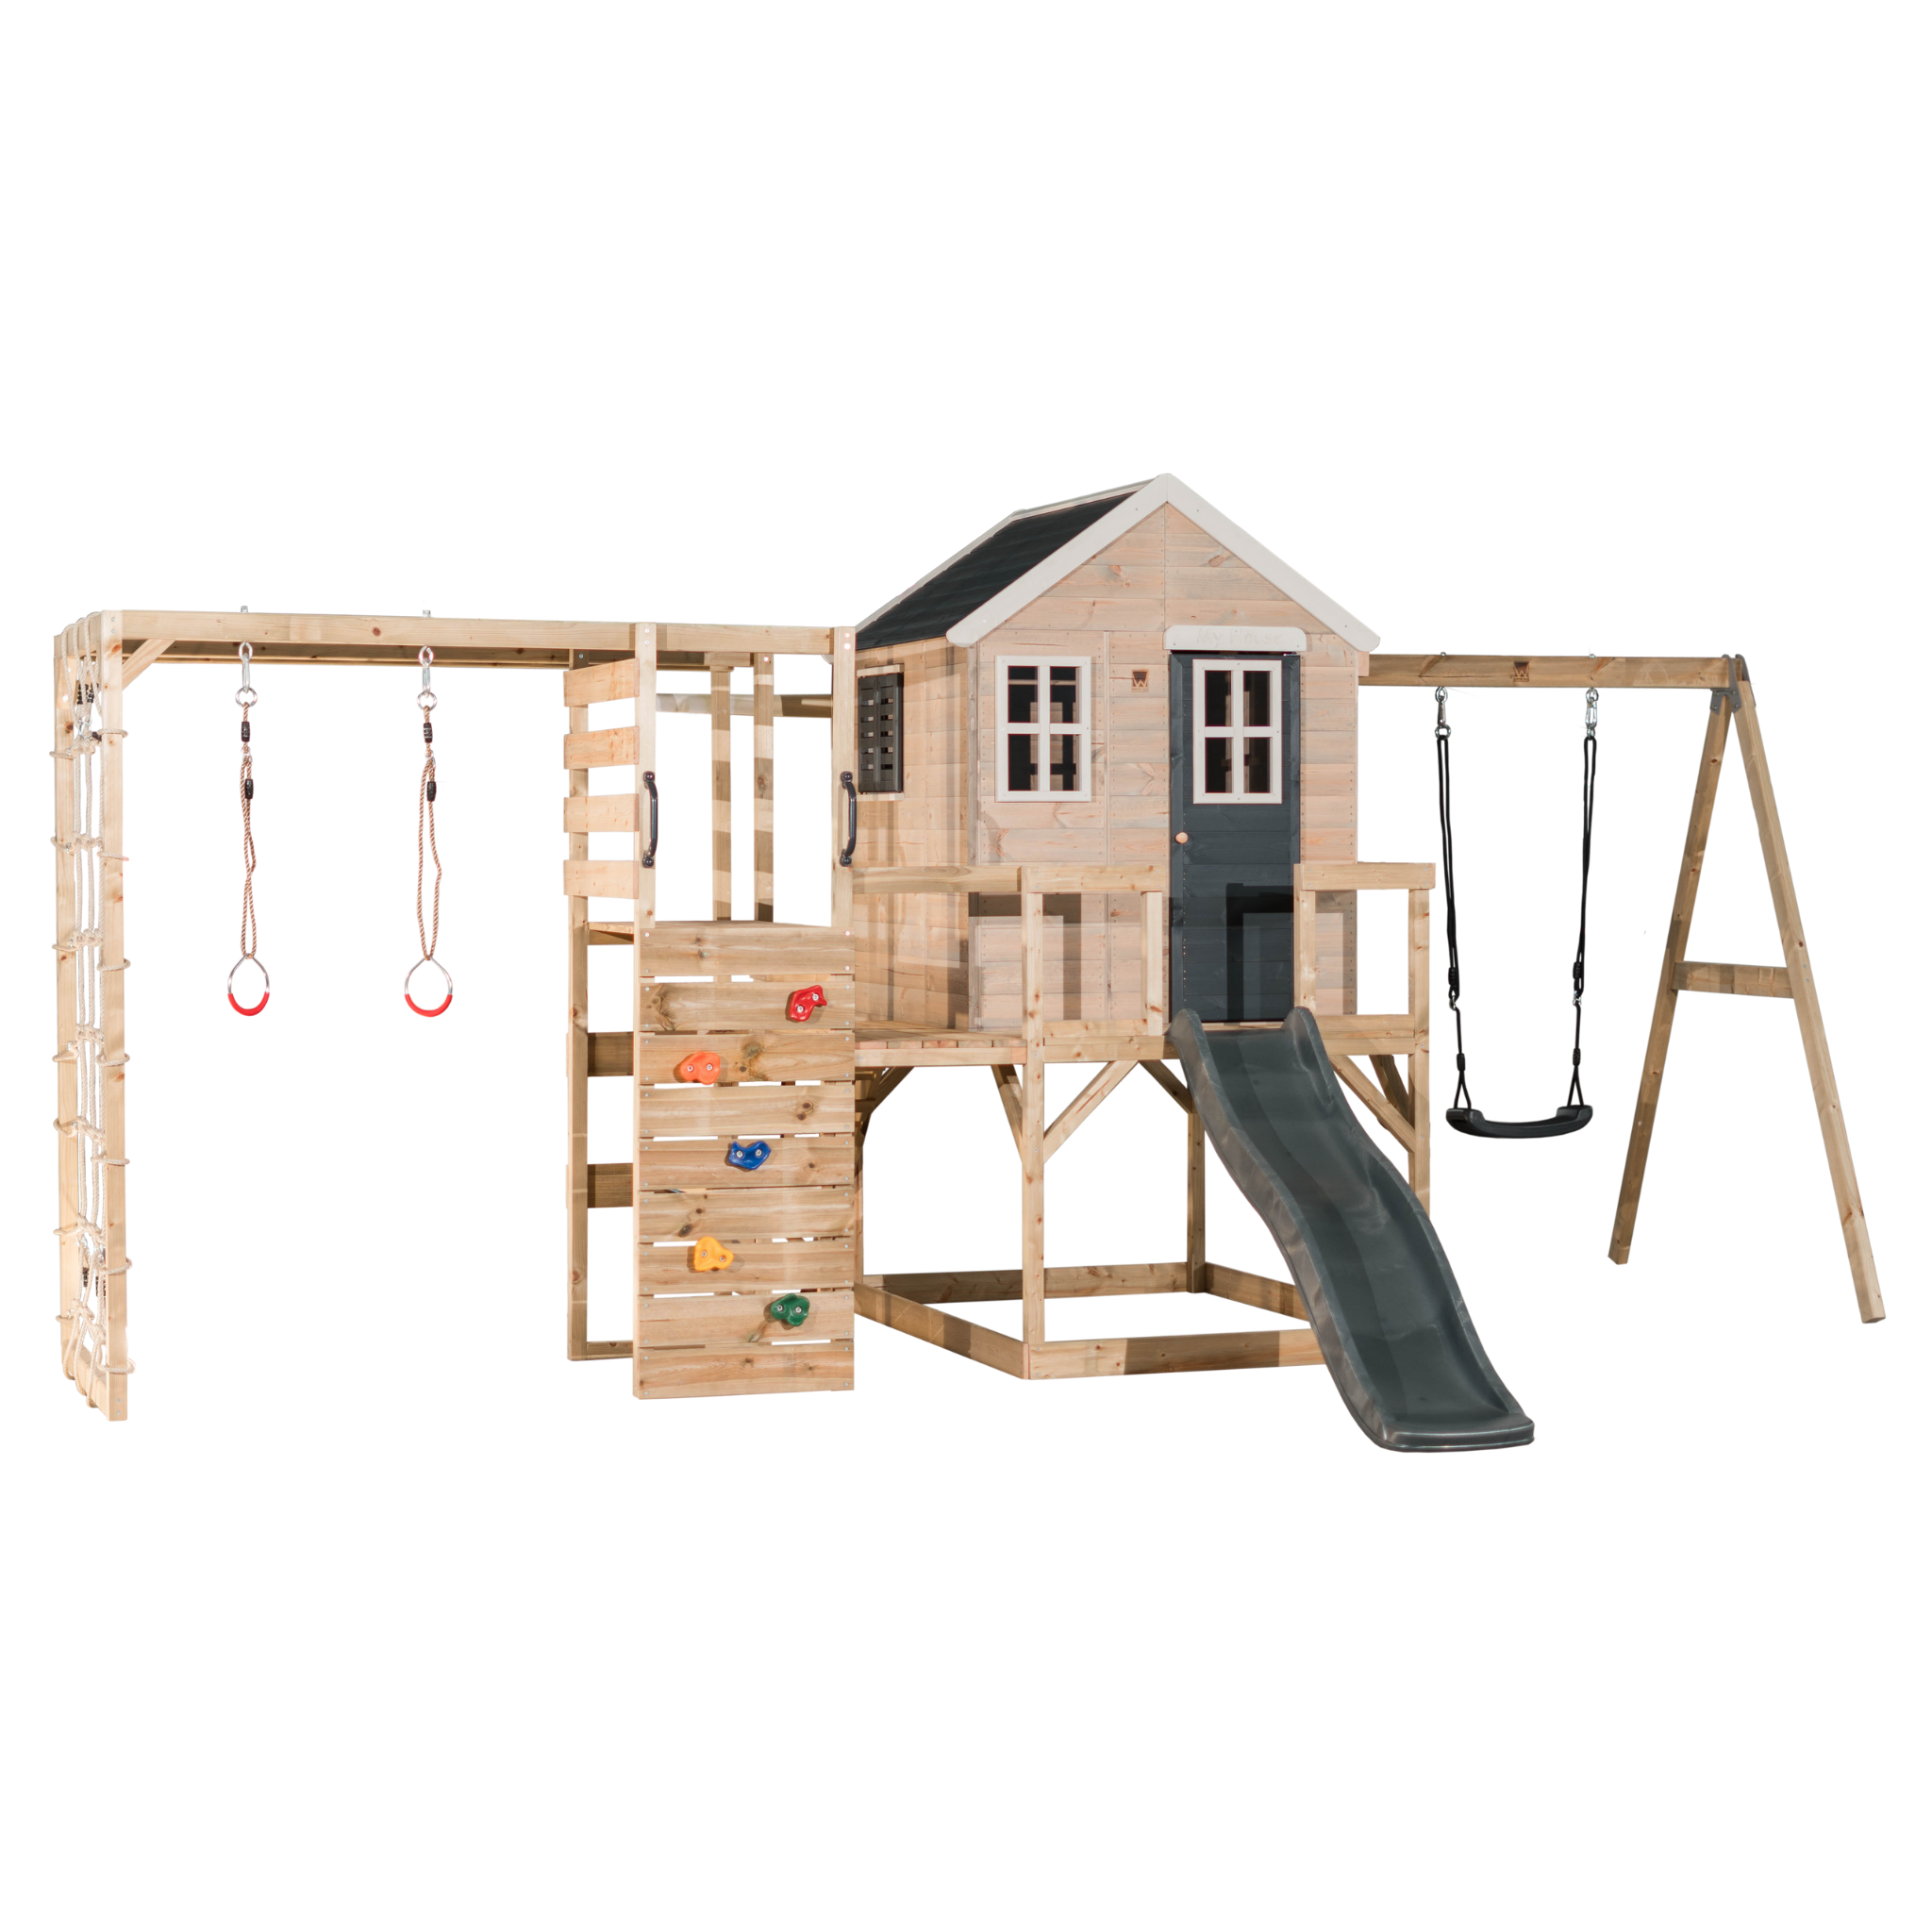 M24-G My Lodge with Platform, Slide and Single Swing + Gym Attachment